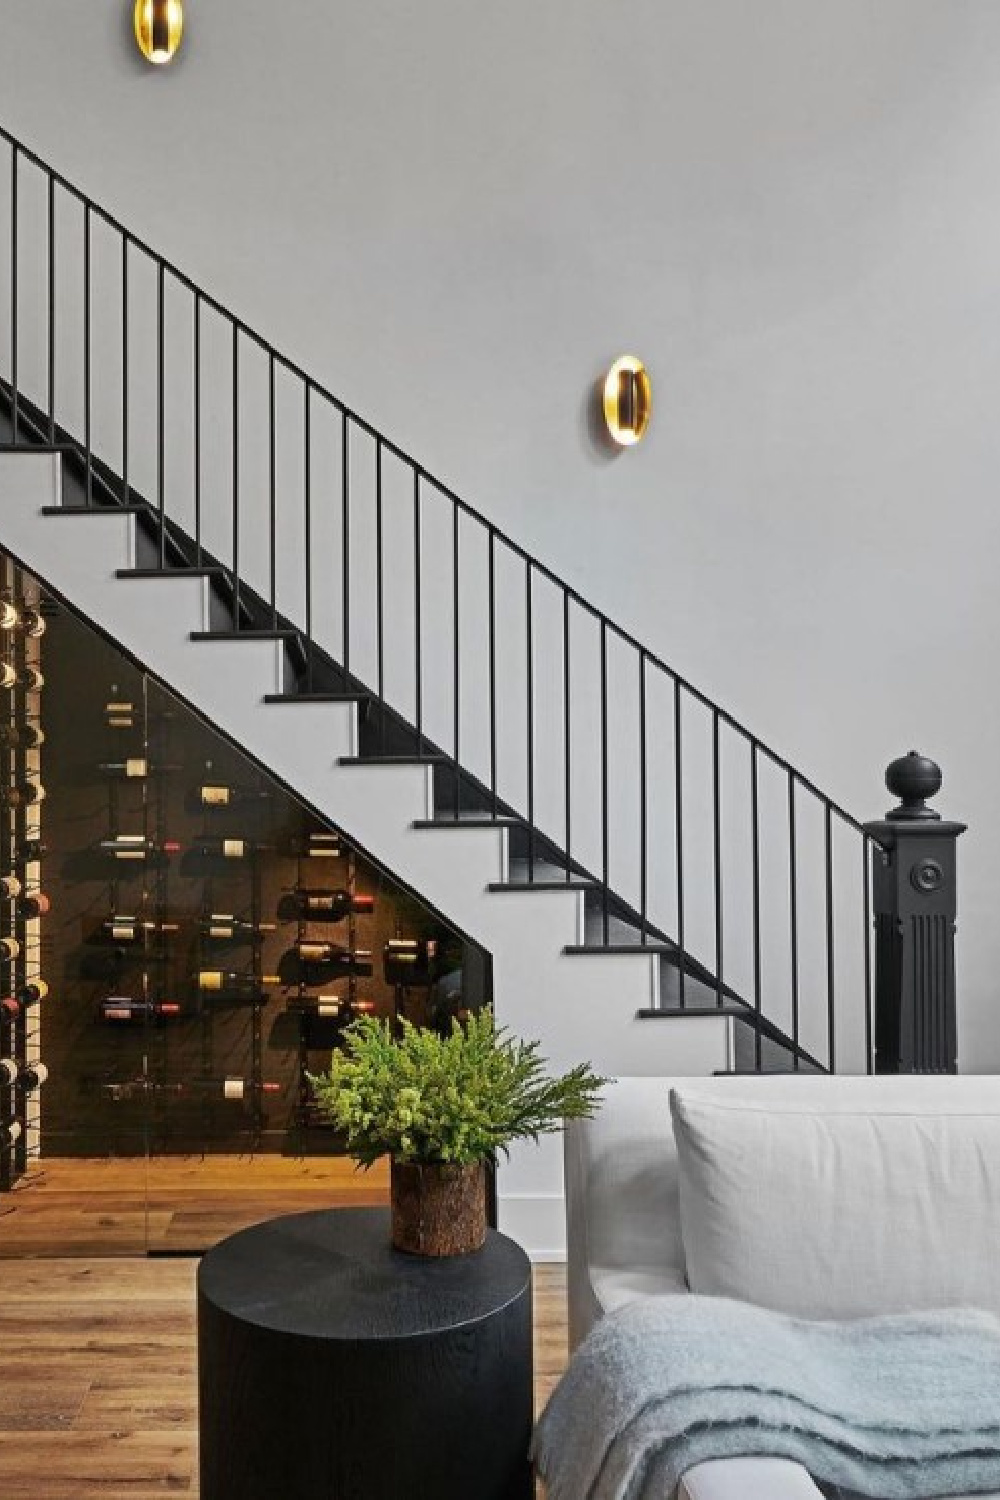 Wine storage room under staircase in a luxurious property designed by Alison Victoria of Windy City Rehab.